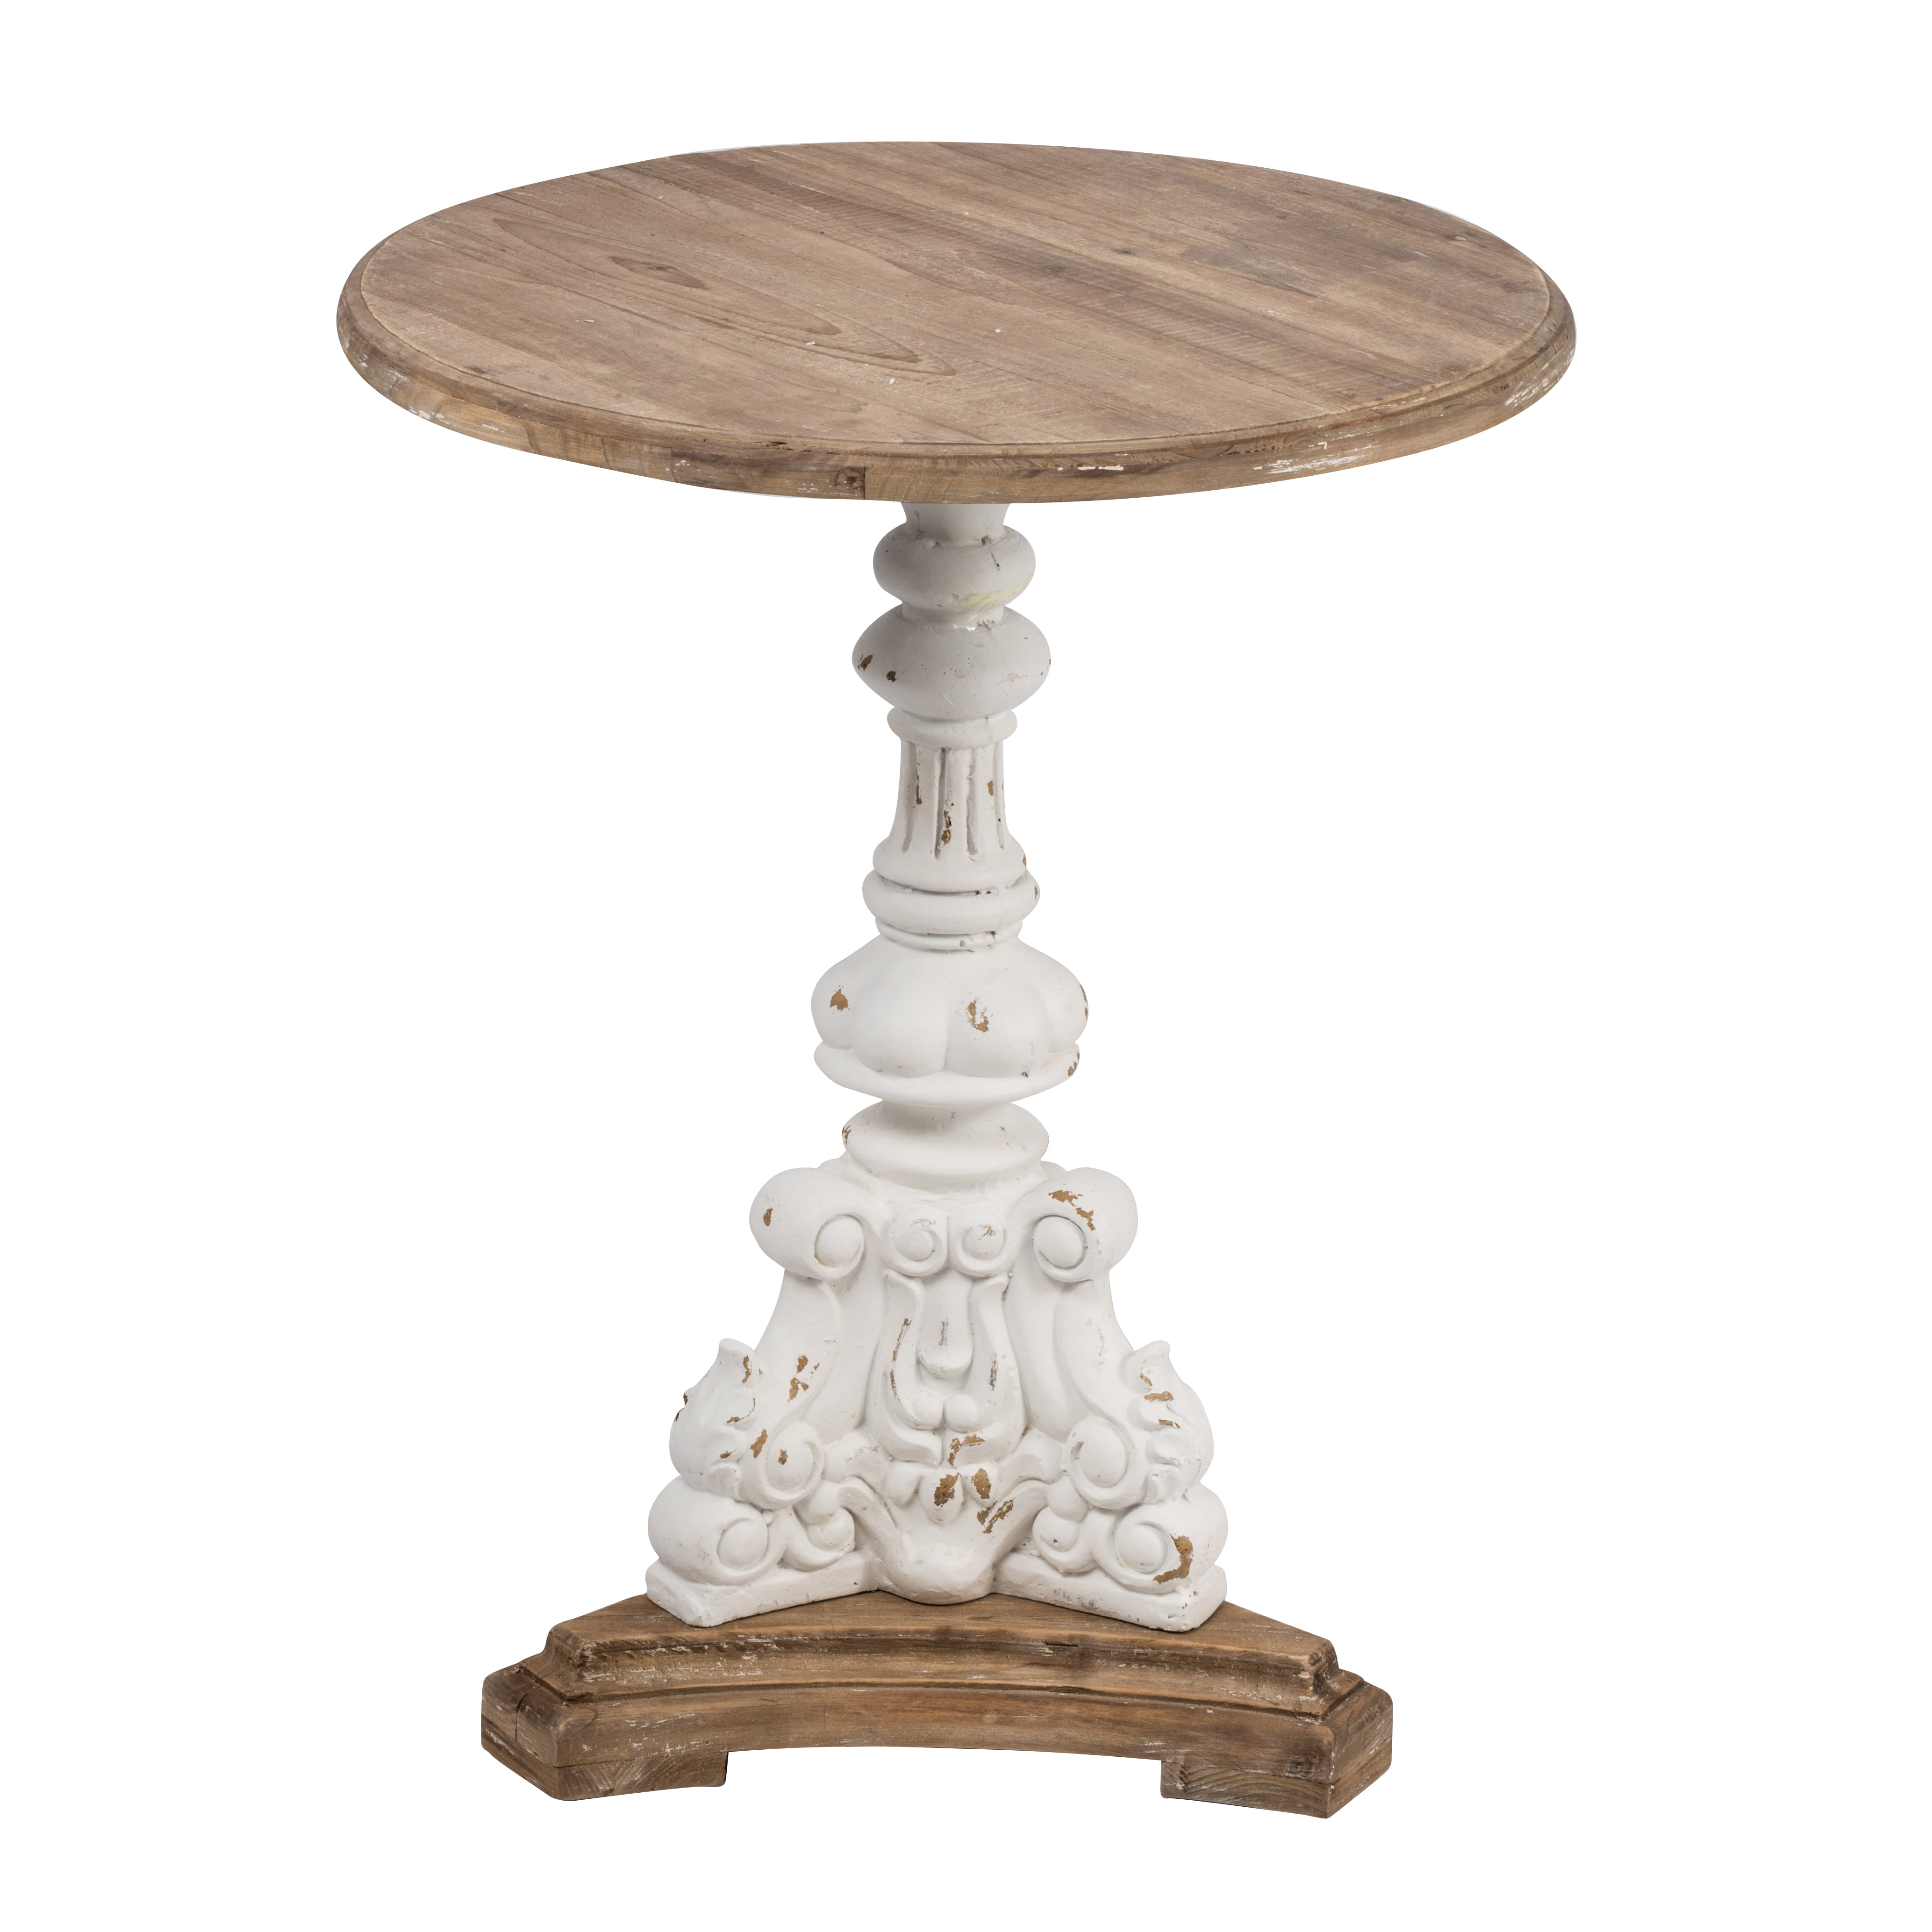 Details about   Small Round Accent Table Furniture End Side Wood Pedestal Dark Cherry Decorative 